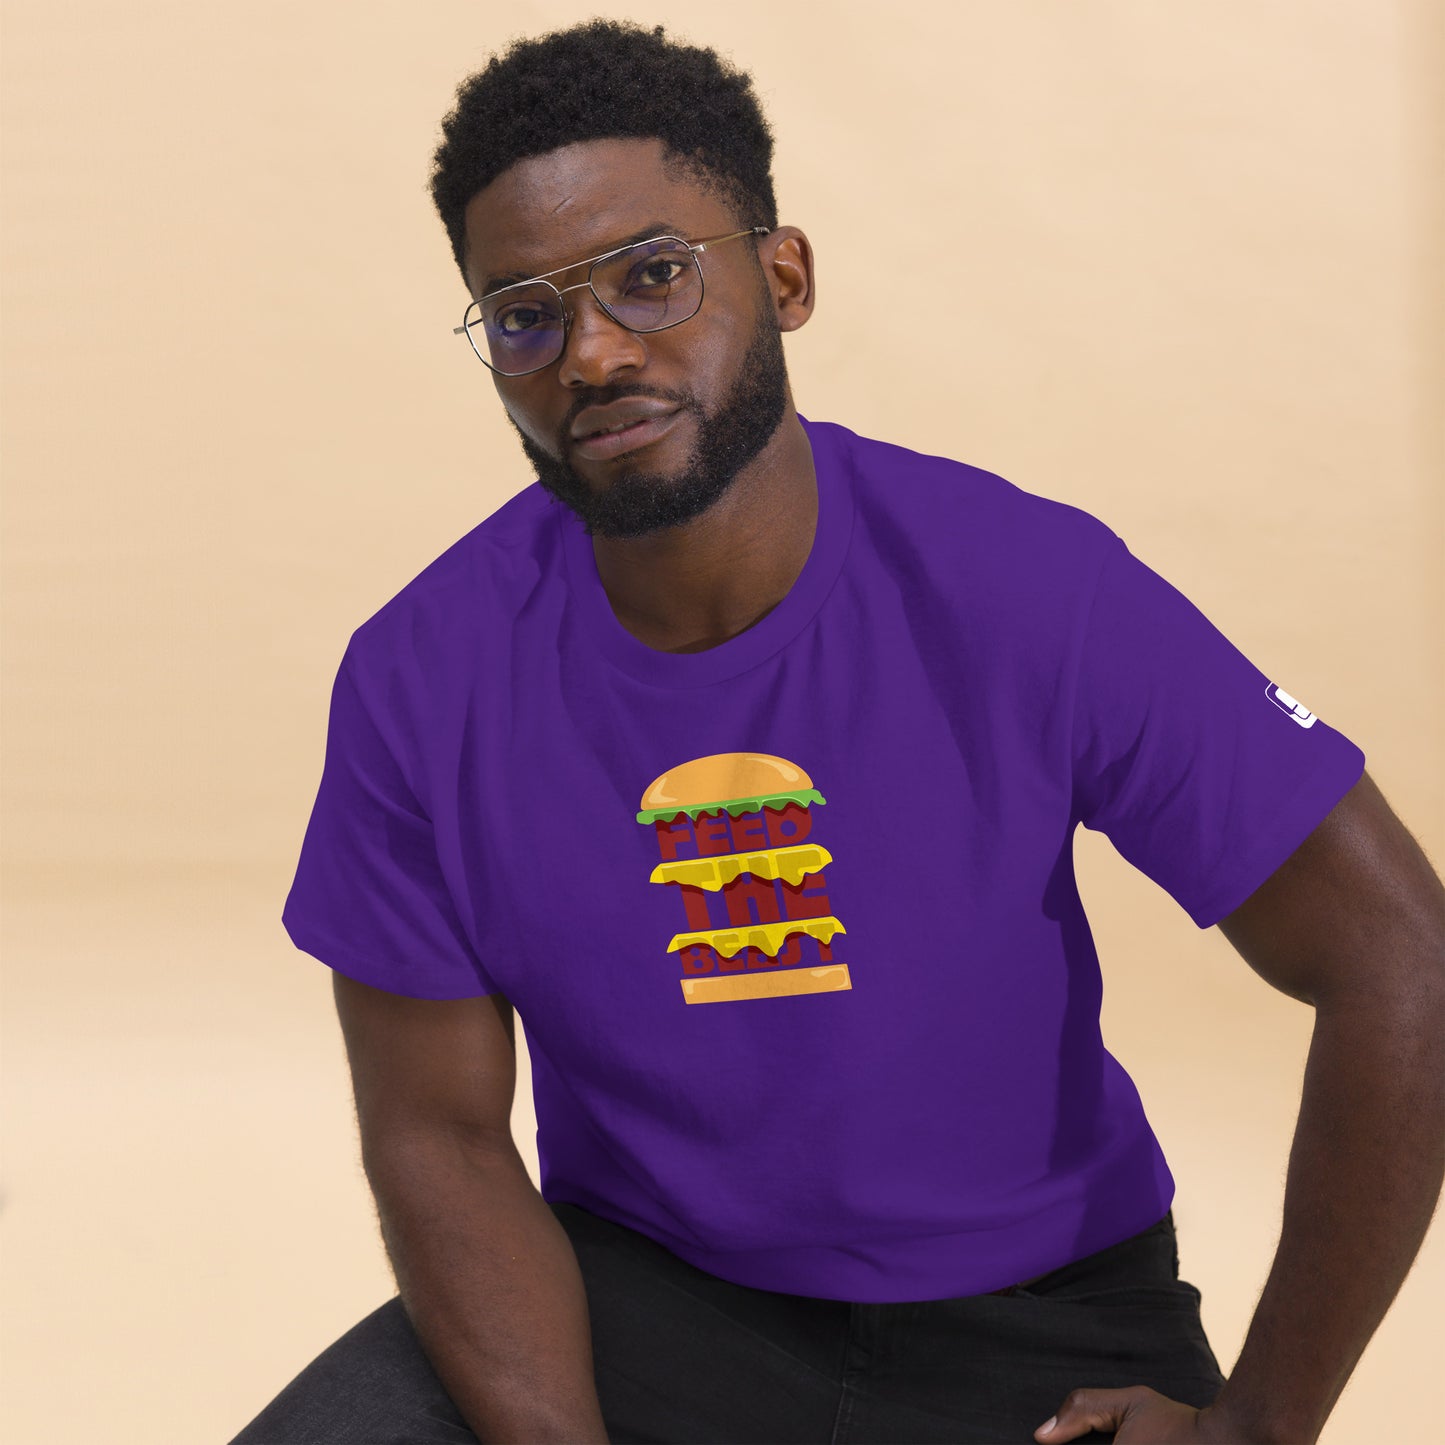 Man wearing glasses and looking thoughtfully to the side, clad in a vibrant purple t-shirt with a colorful burger graphic and the words 'FEED THE BEAST' in yellow, seated against a warm beige backdrop.